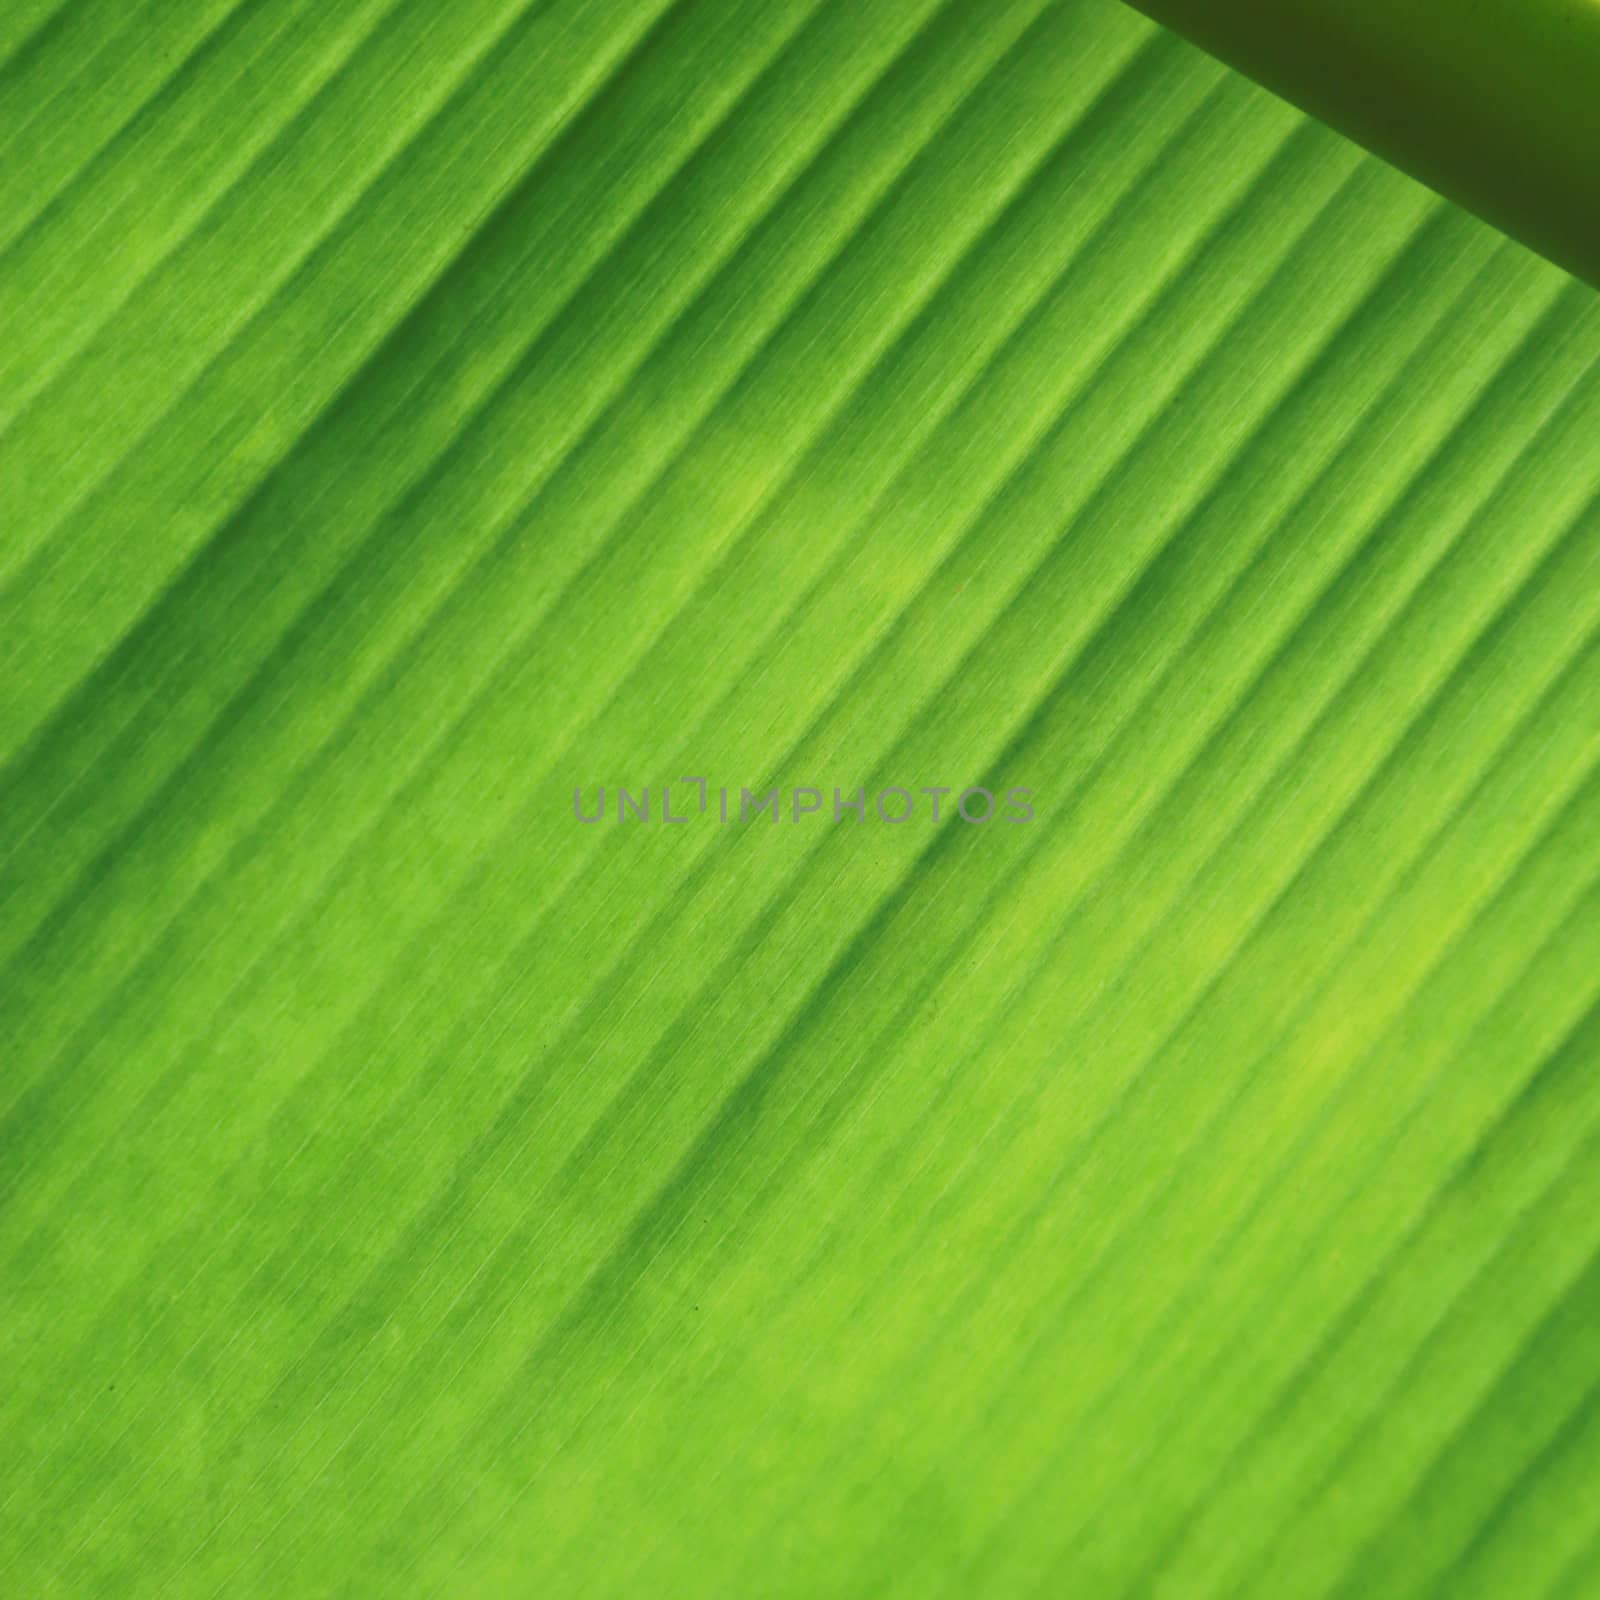 Line texture banana leaf with for background